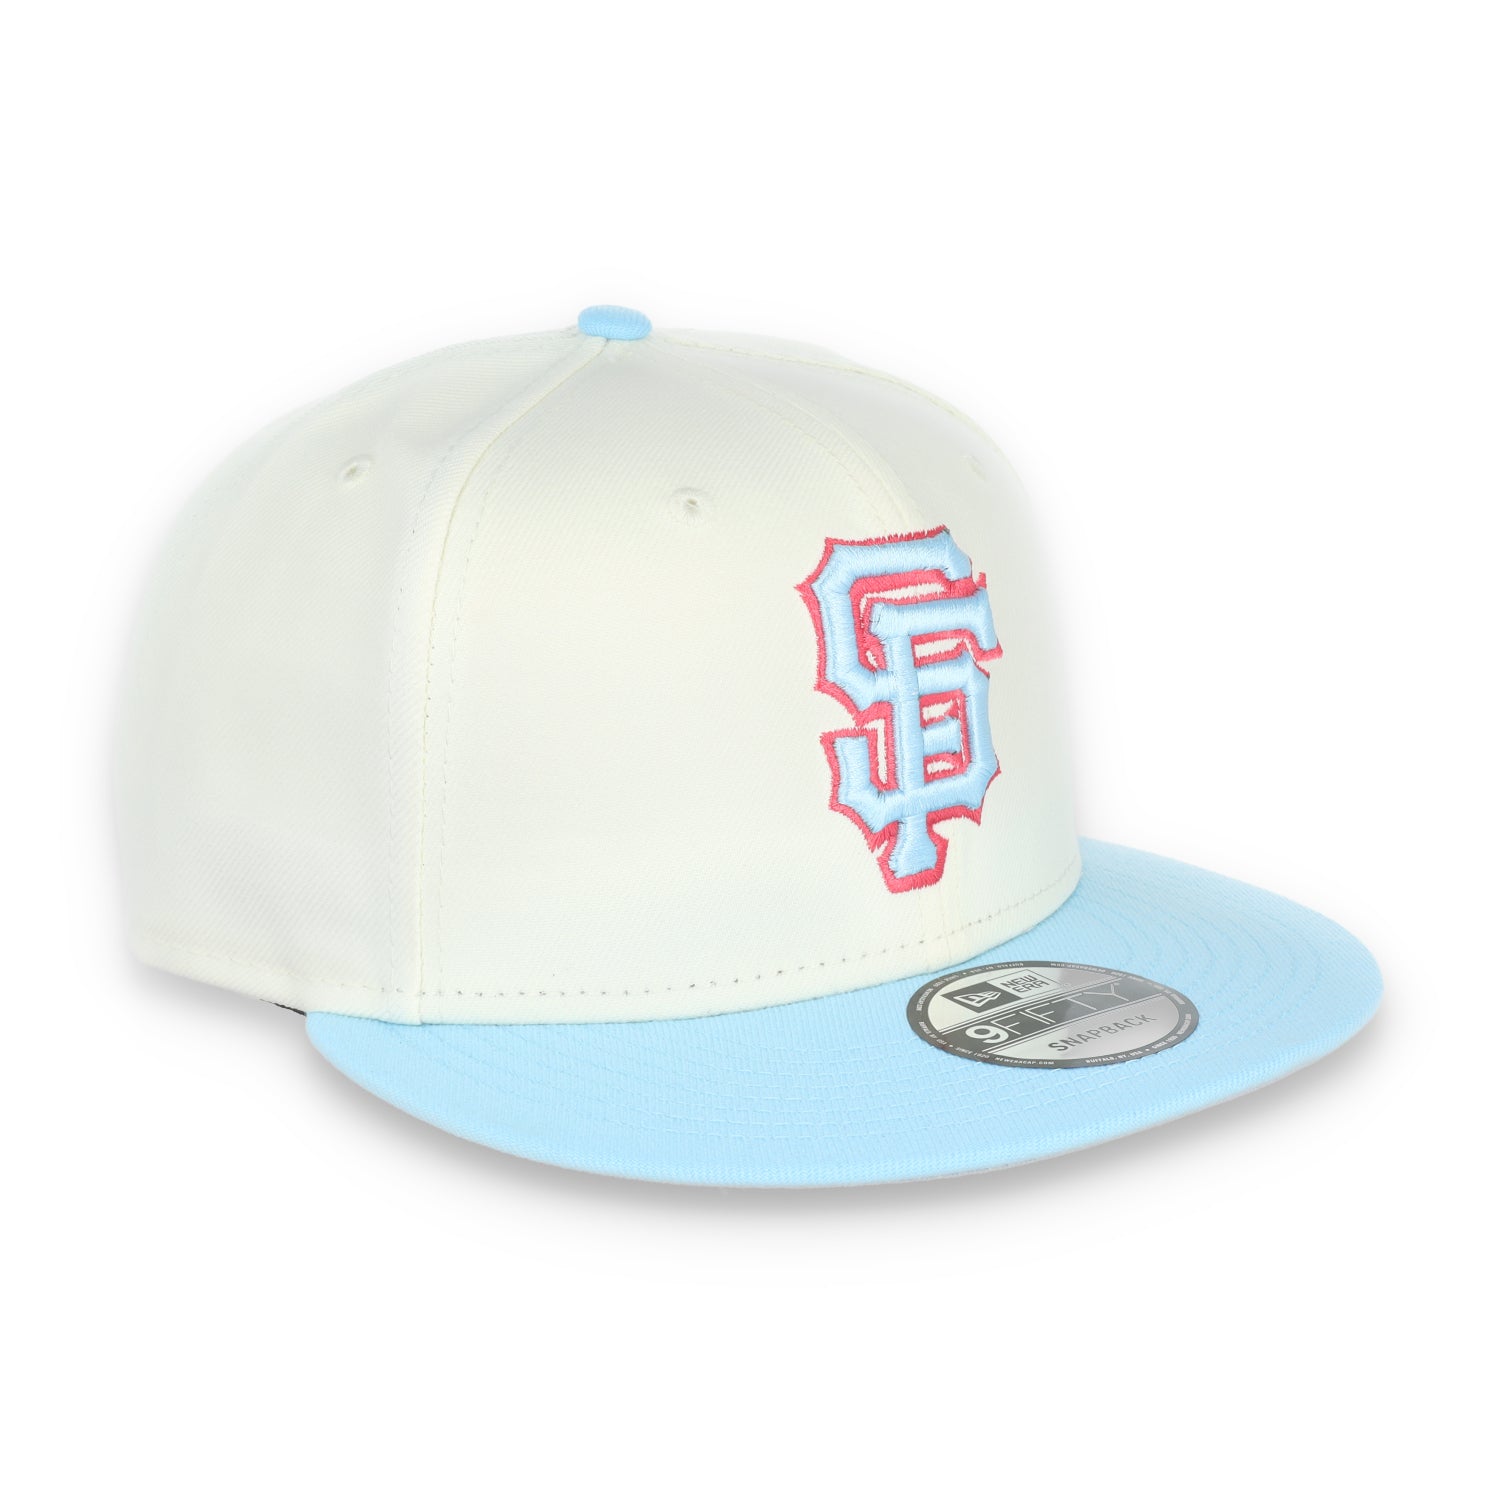 New Era San Francisco Giants 2-Tone Color Pack 9FIFTY Snapback Hat-Chrome/Baby Blue